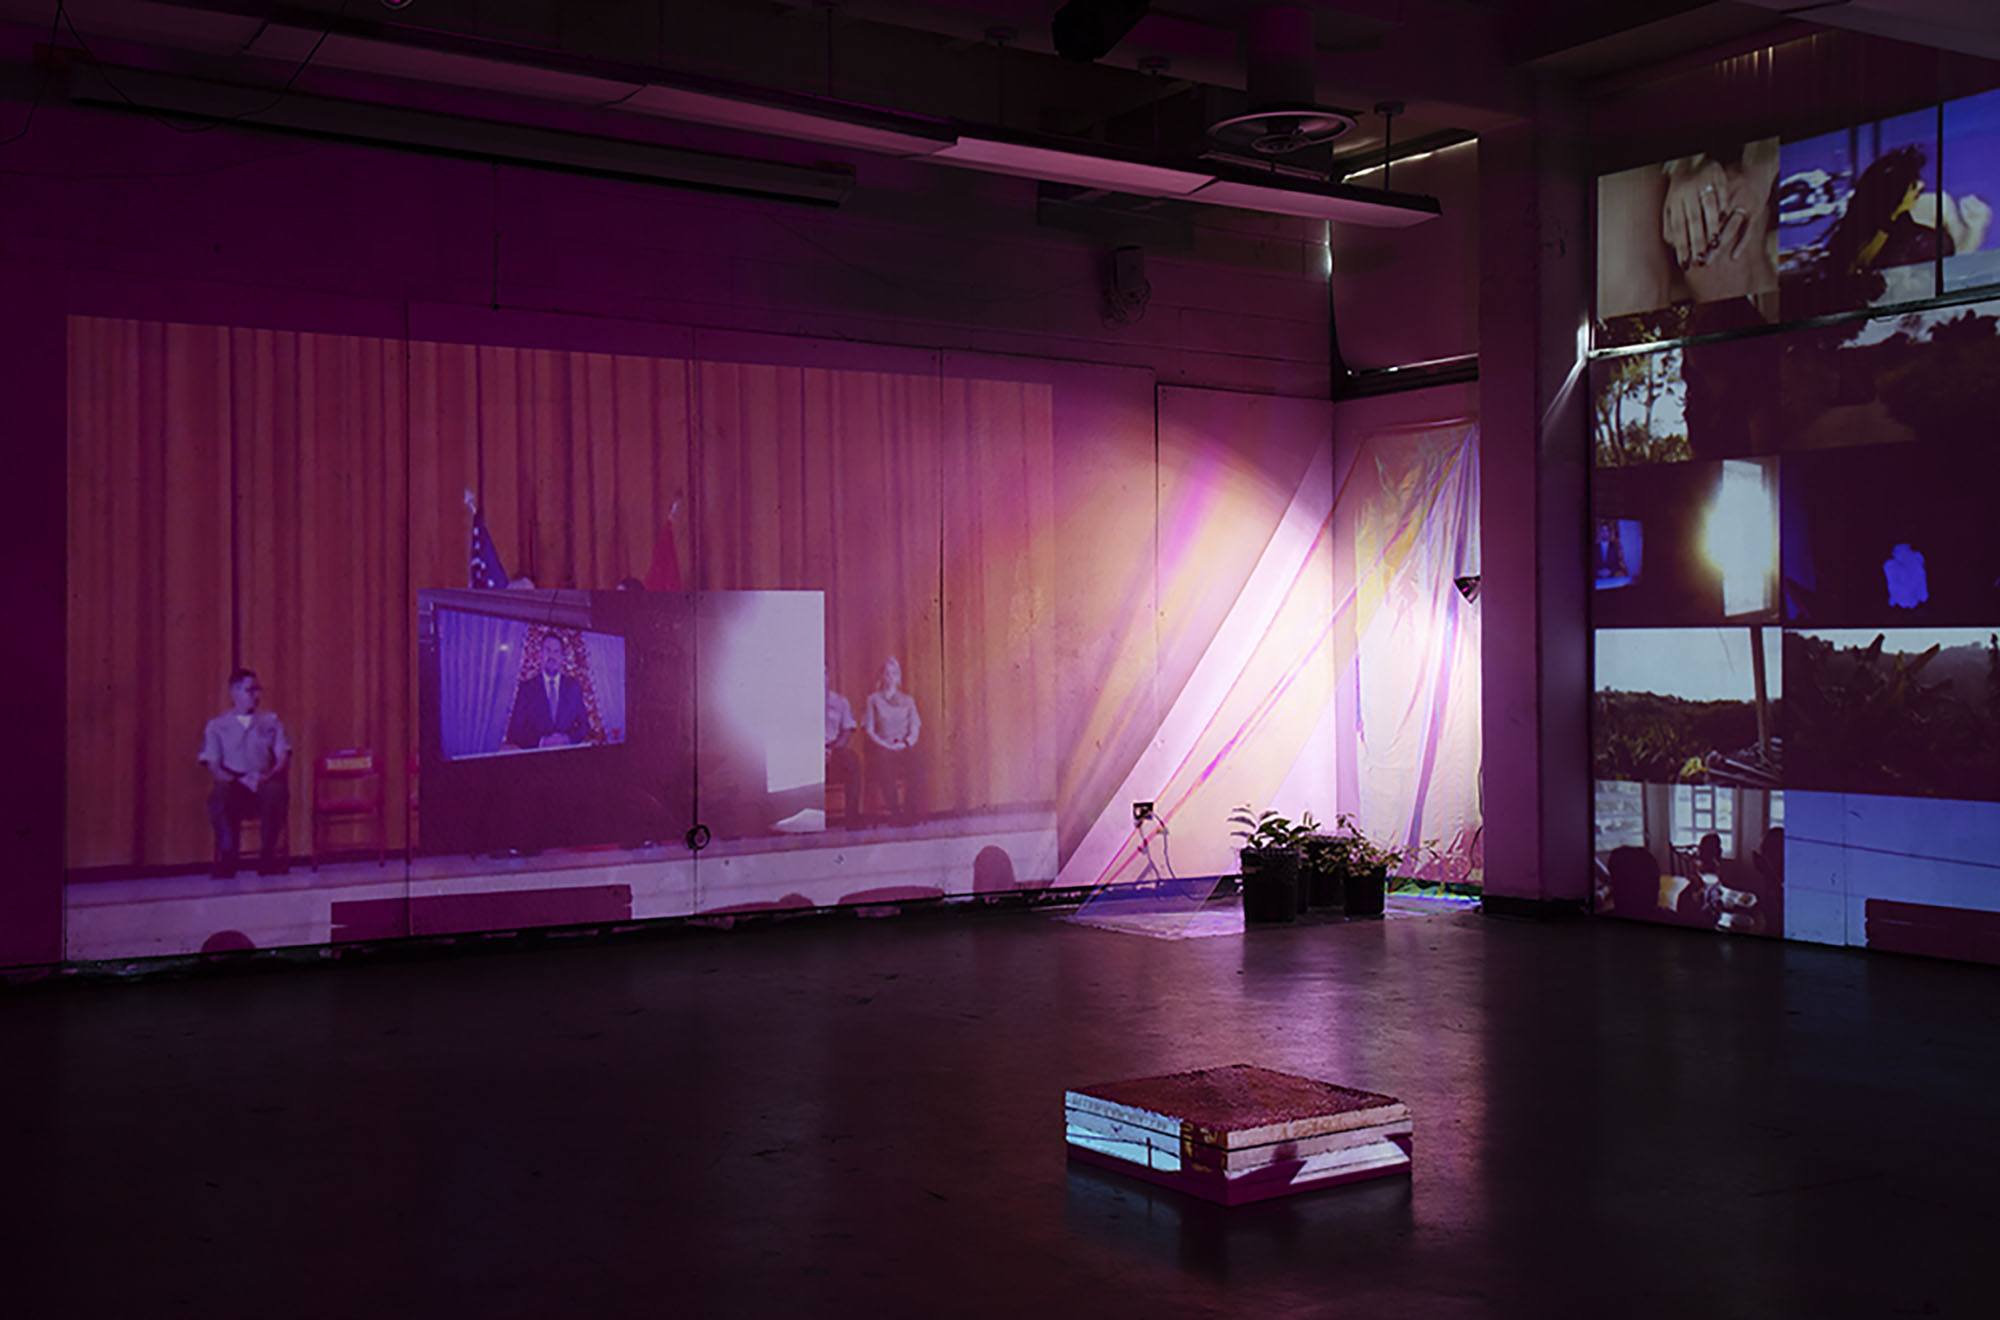 A gallery installation containing many projections